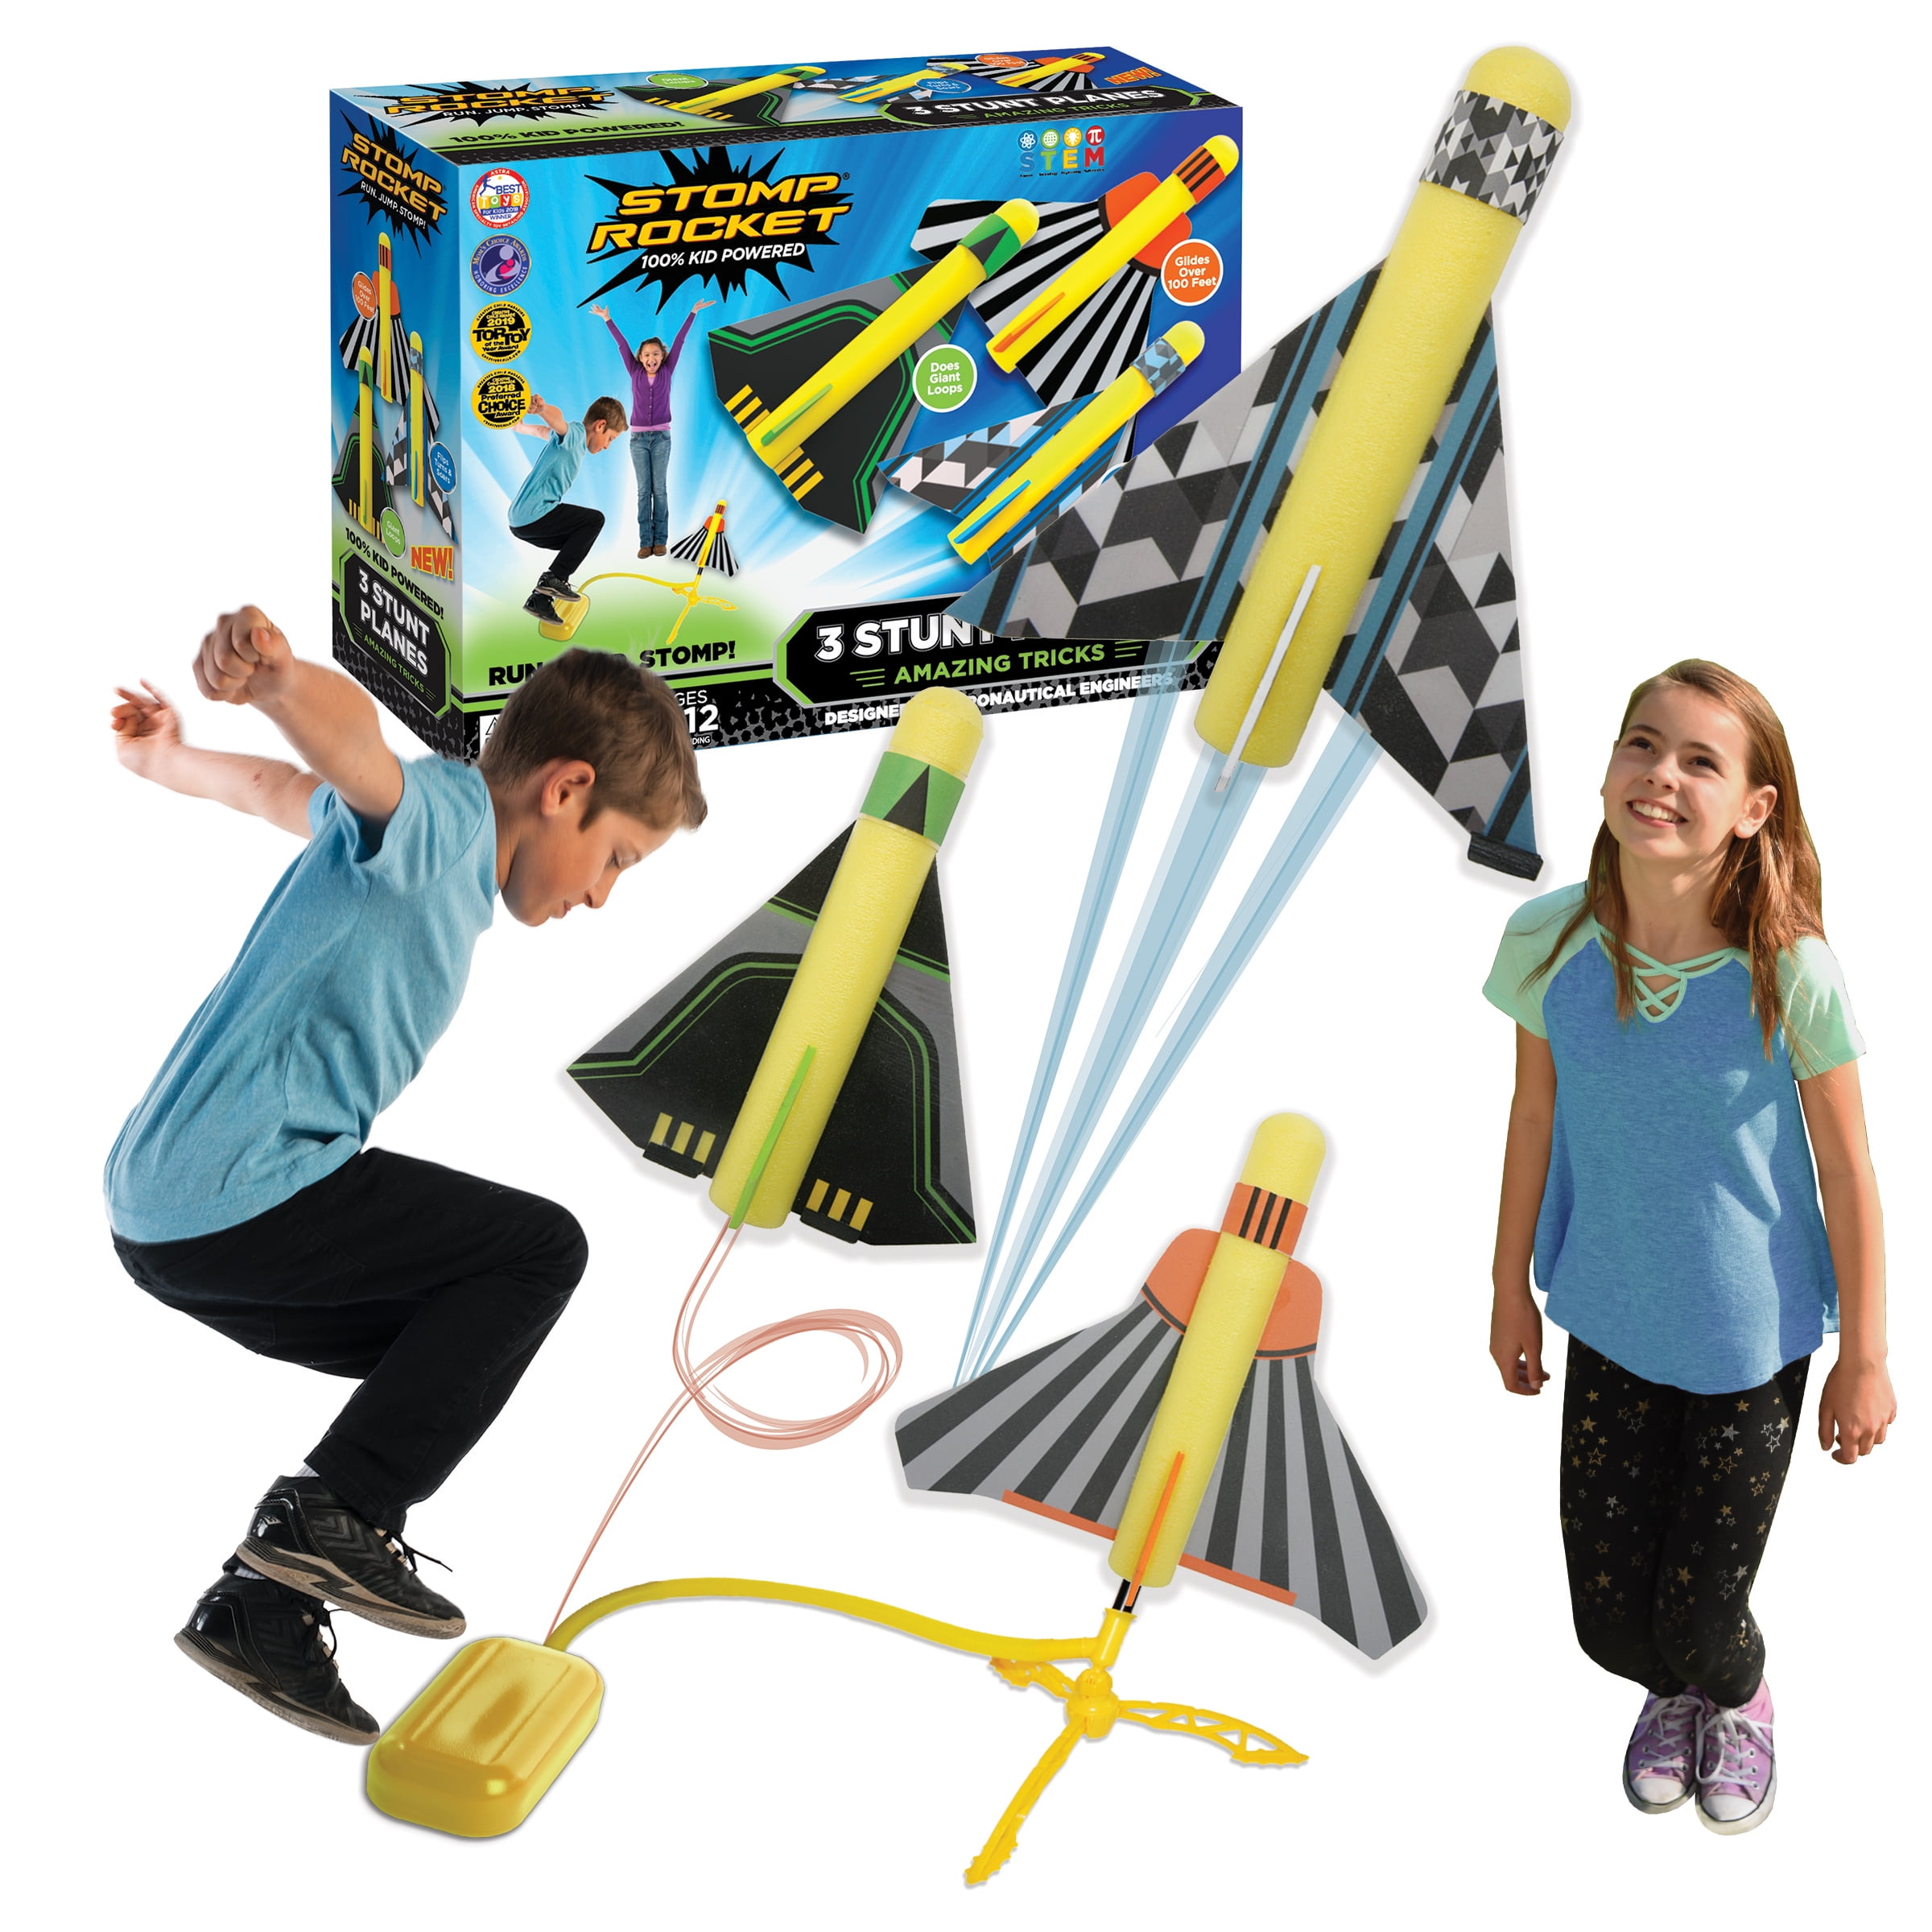 FAST & FREE DELIVERY STOMP ROCKET ULTRA ROCKET LAUNCHER FOR OUTDOOR FUN 